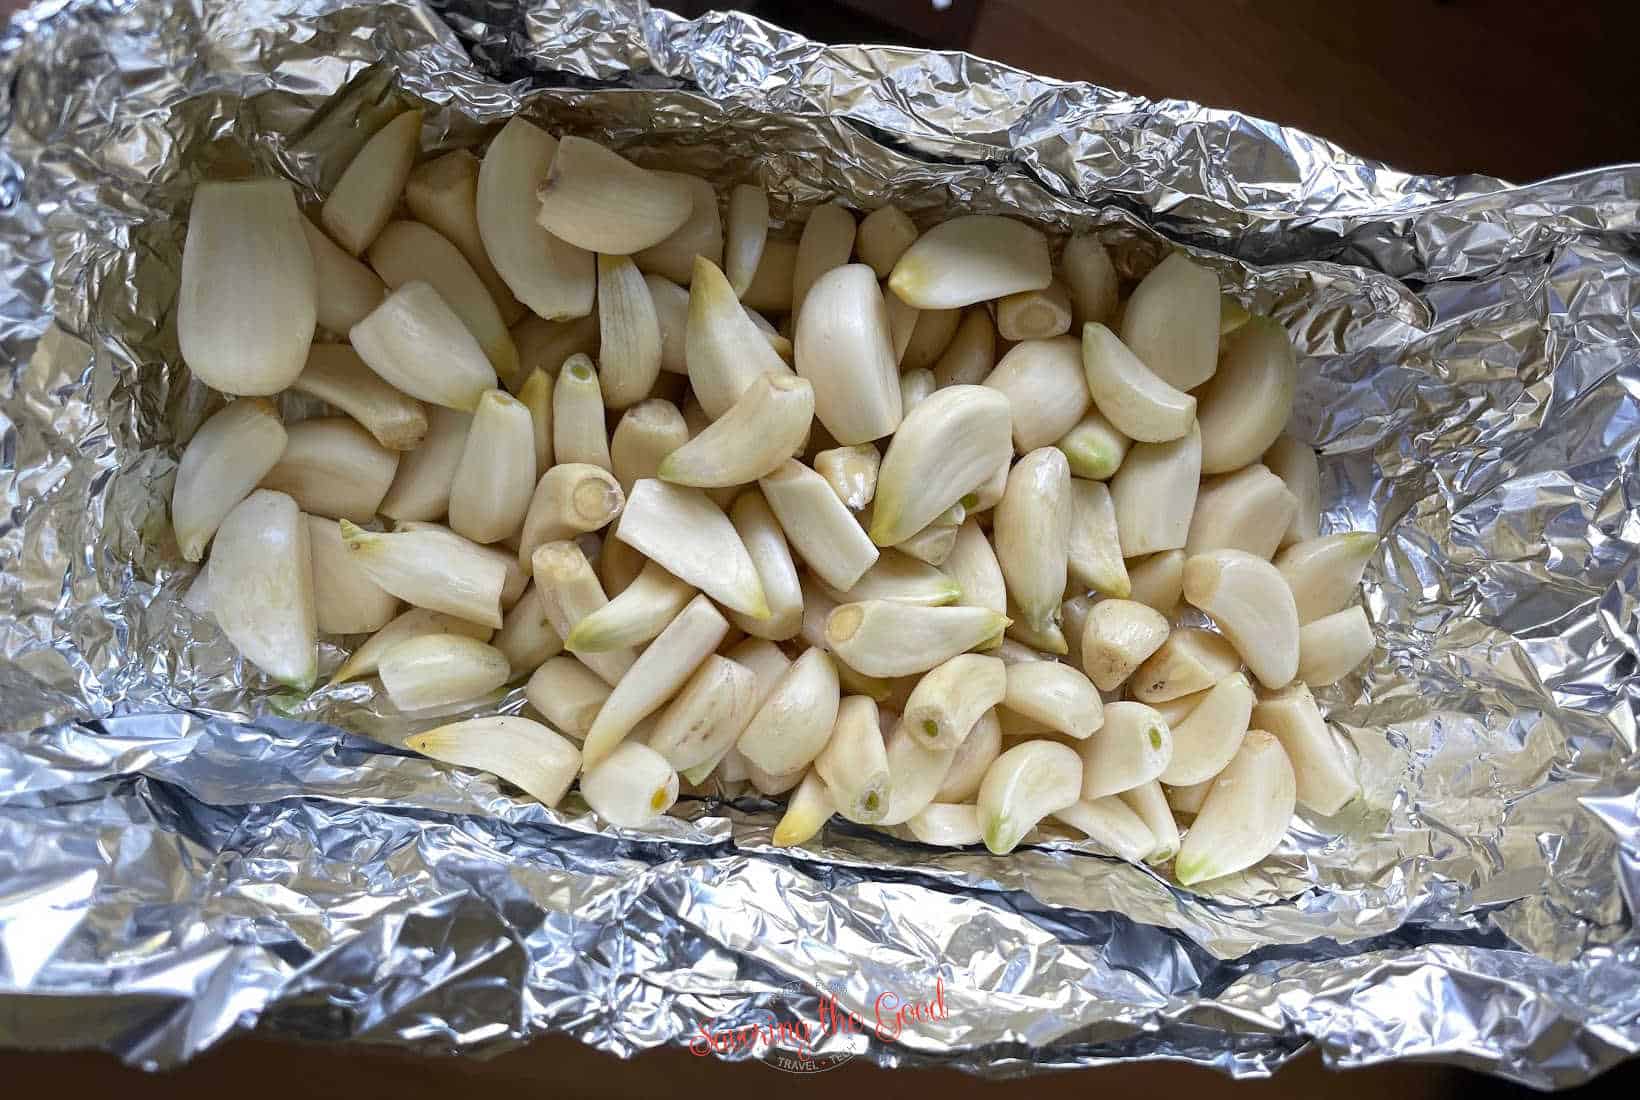 50 cloves of garlic in a tin foil pouch.